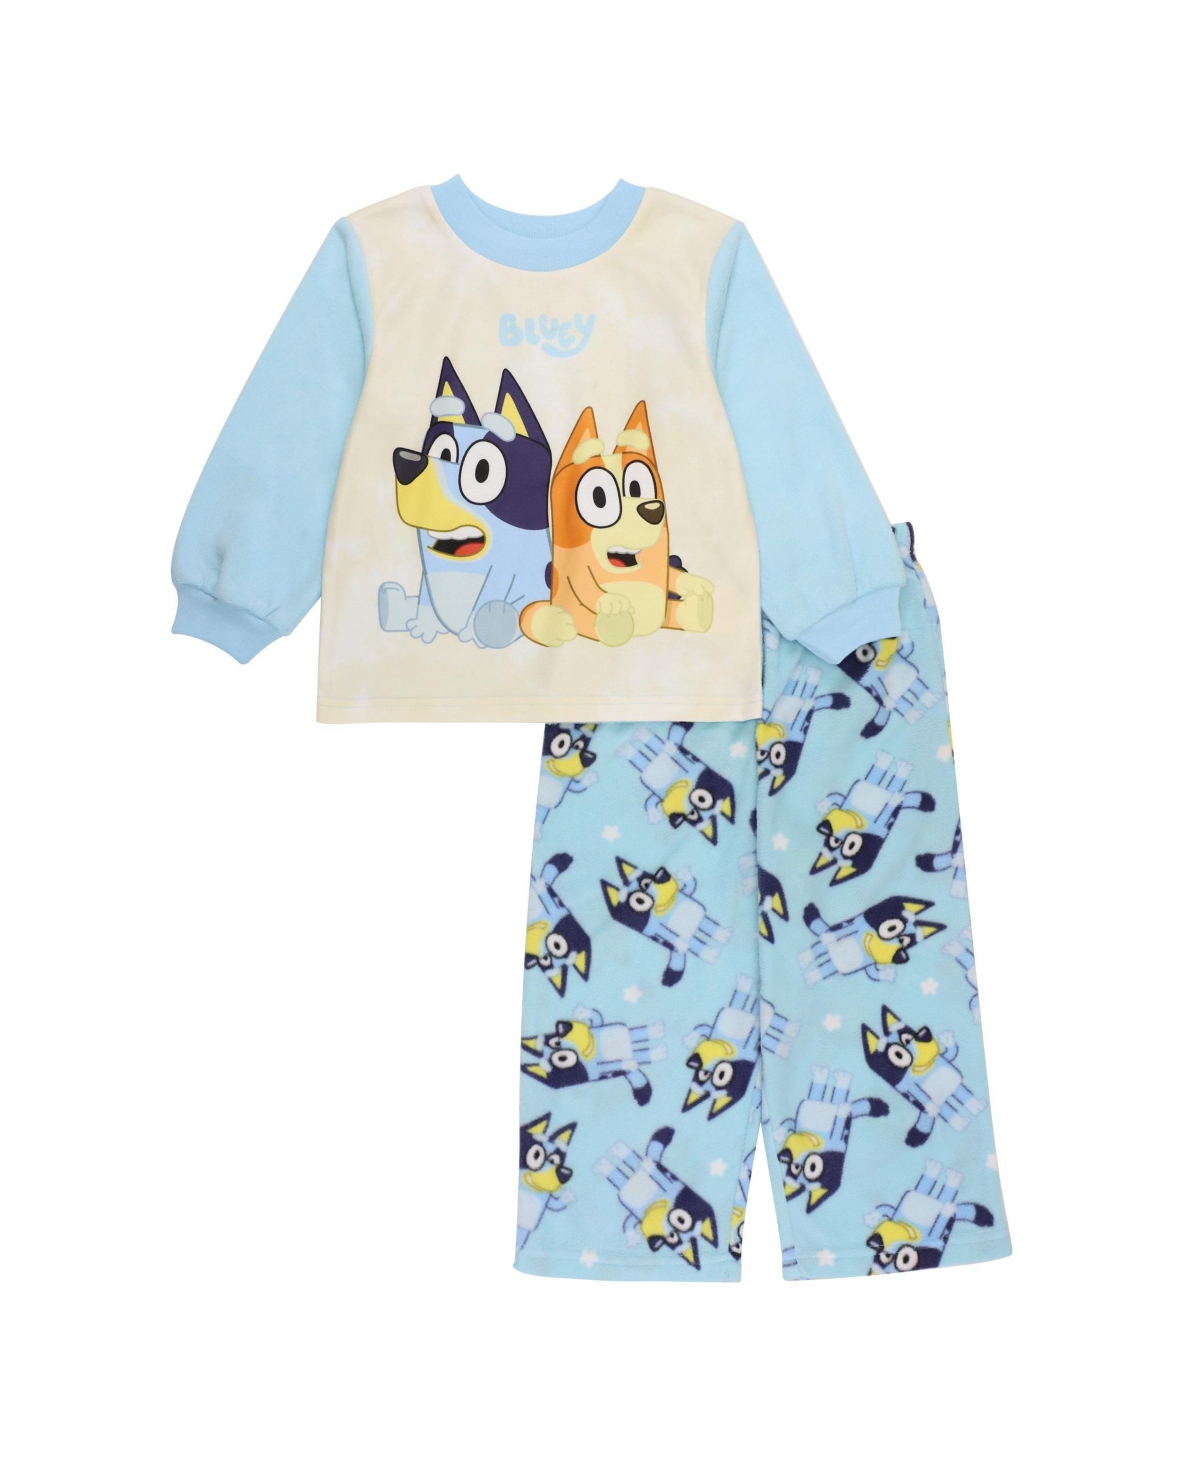 Bluey Kids' Toddler Boys Top And Pajama, 2 Piece Set In Assorted